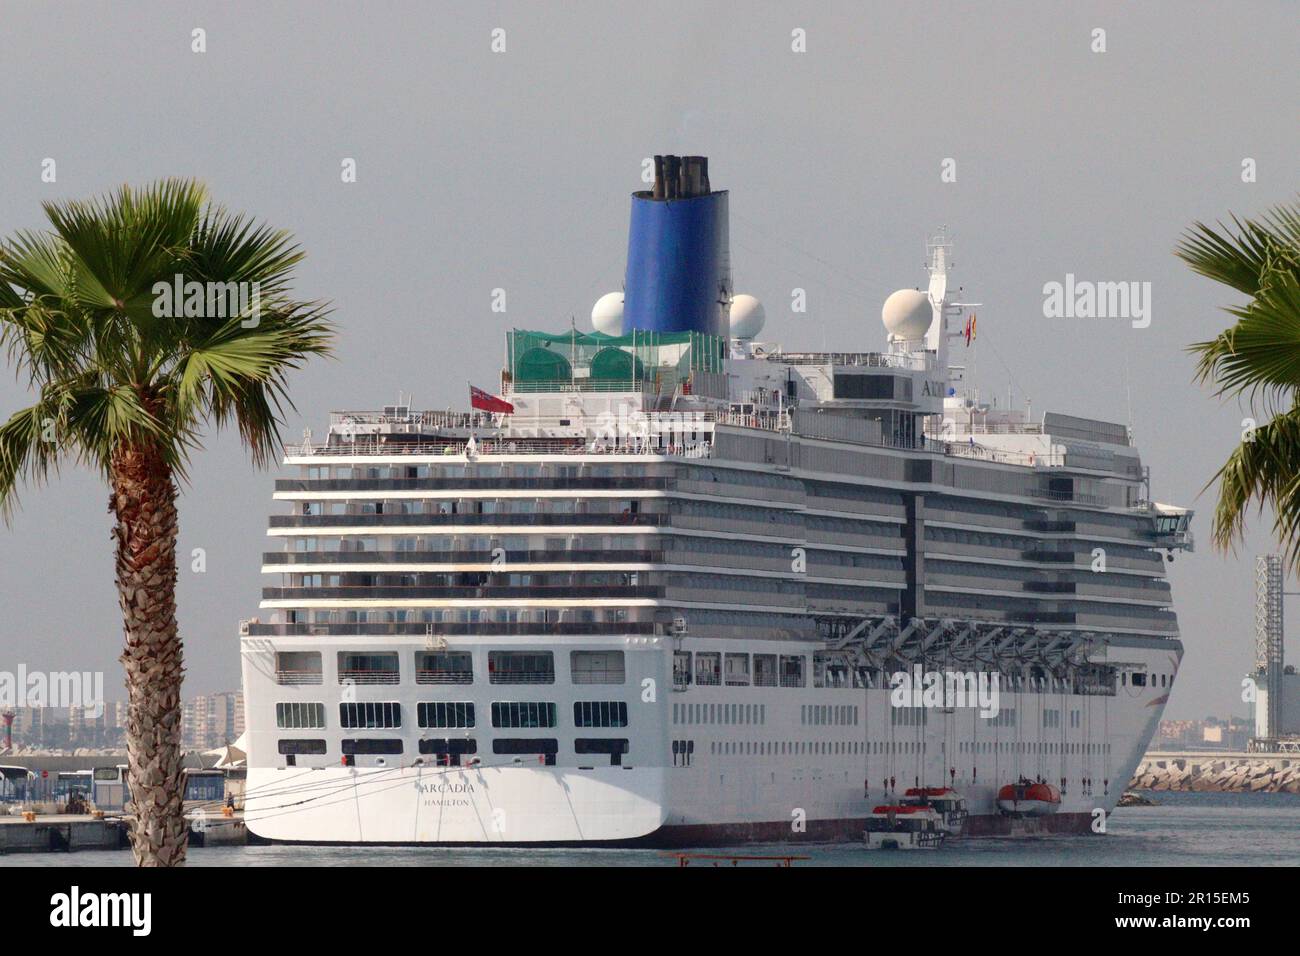 The Arcadia cruise ship at Alicante, Spain, after guests disemberked a crew alert practice session involved the launching of the starboard lifeboats. Stock Photo